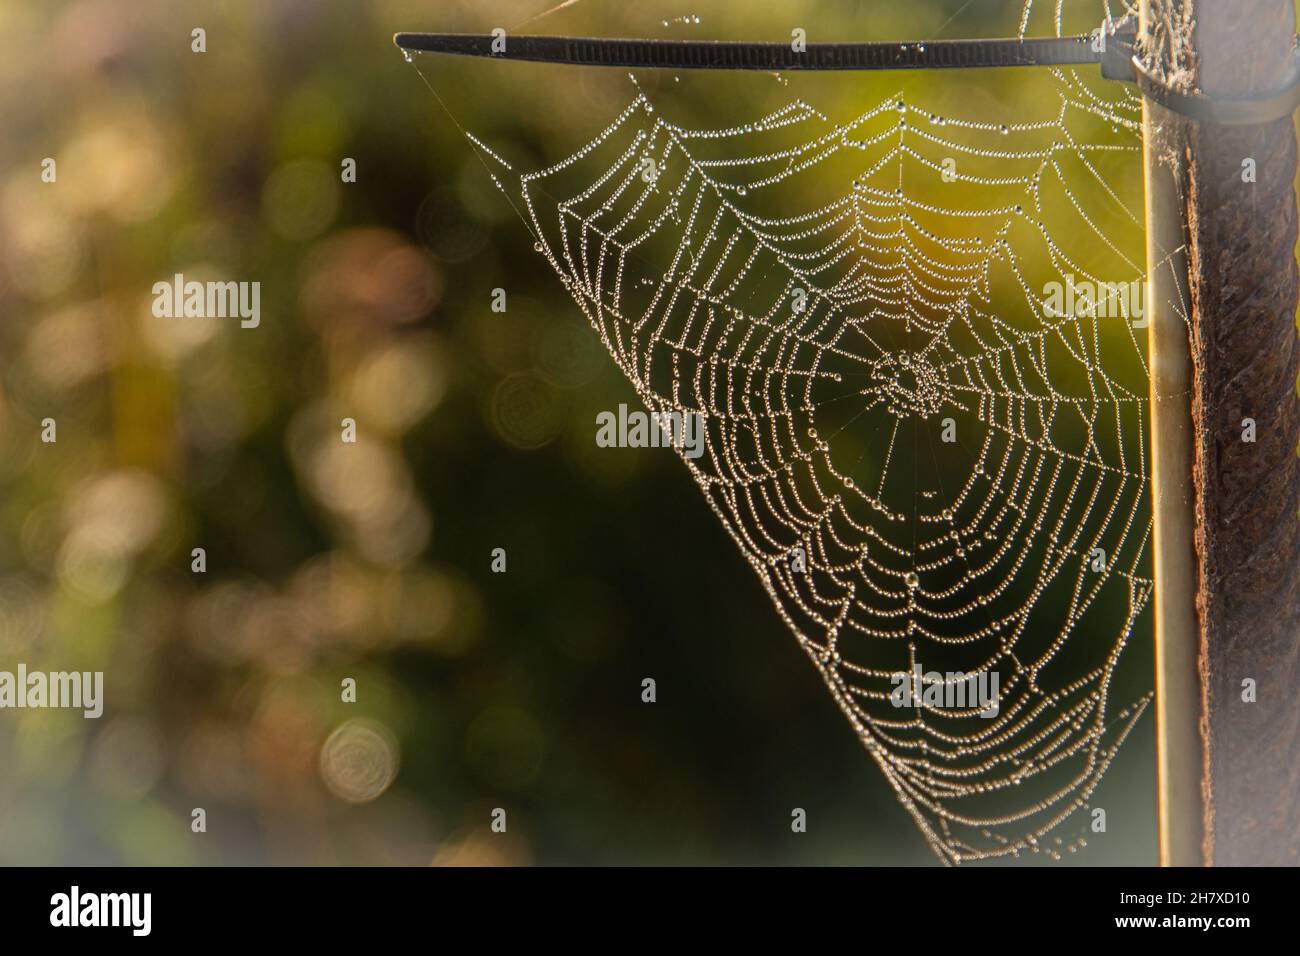 morning dew lights up delicate spider's web Stock Photo